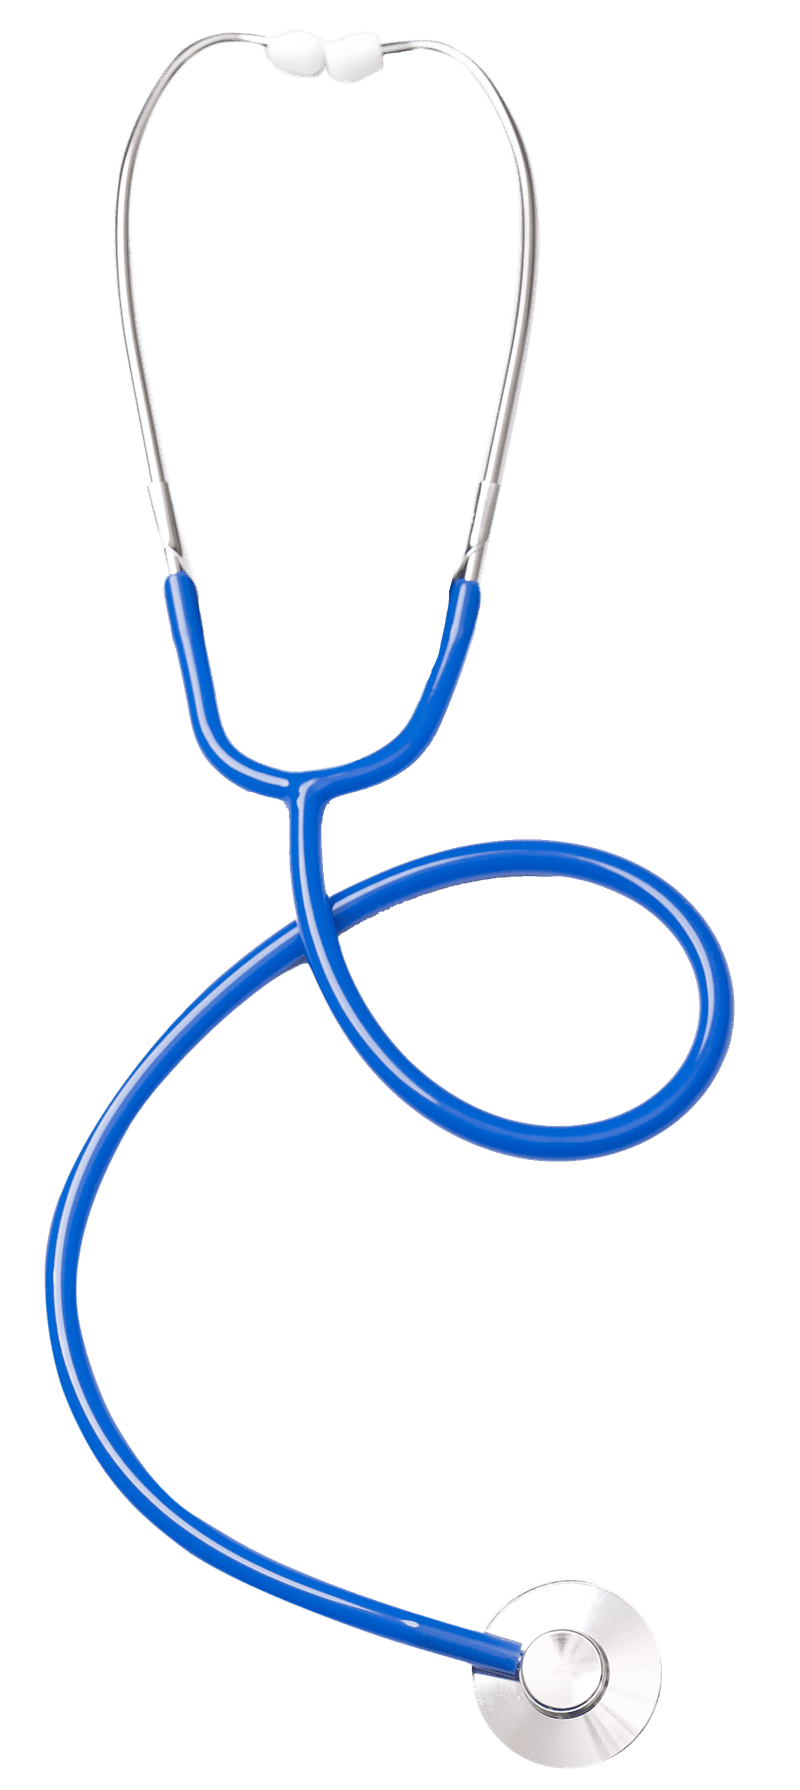 Stethoscope-Cutout.png